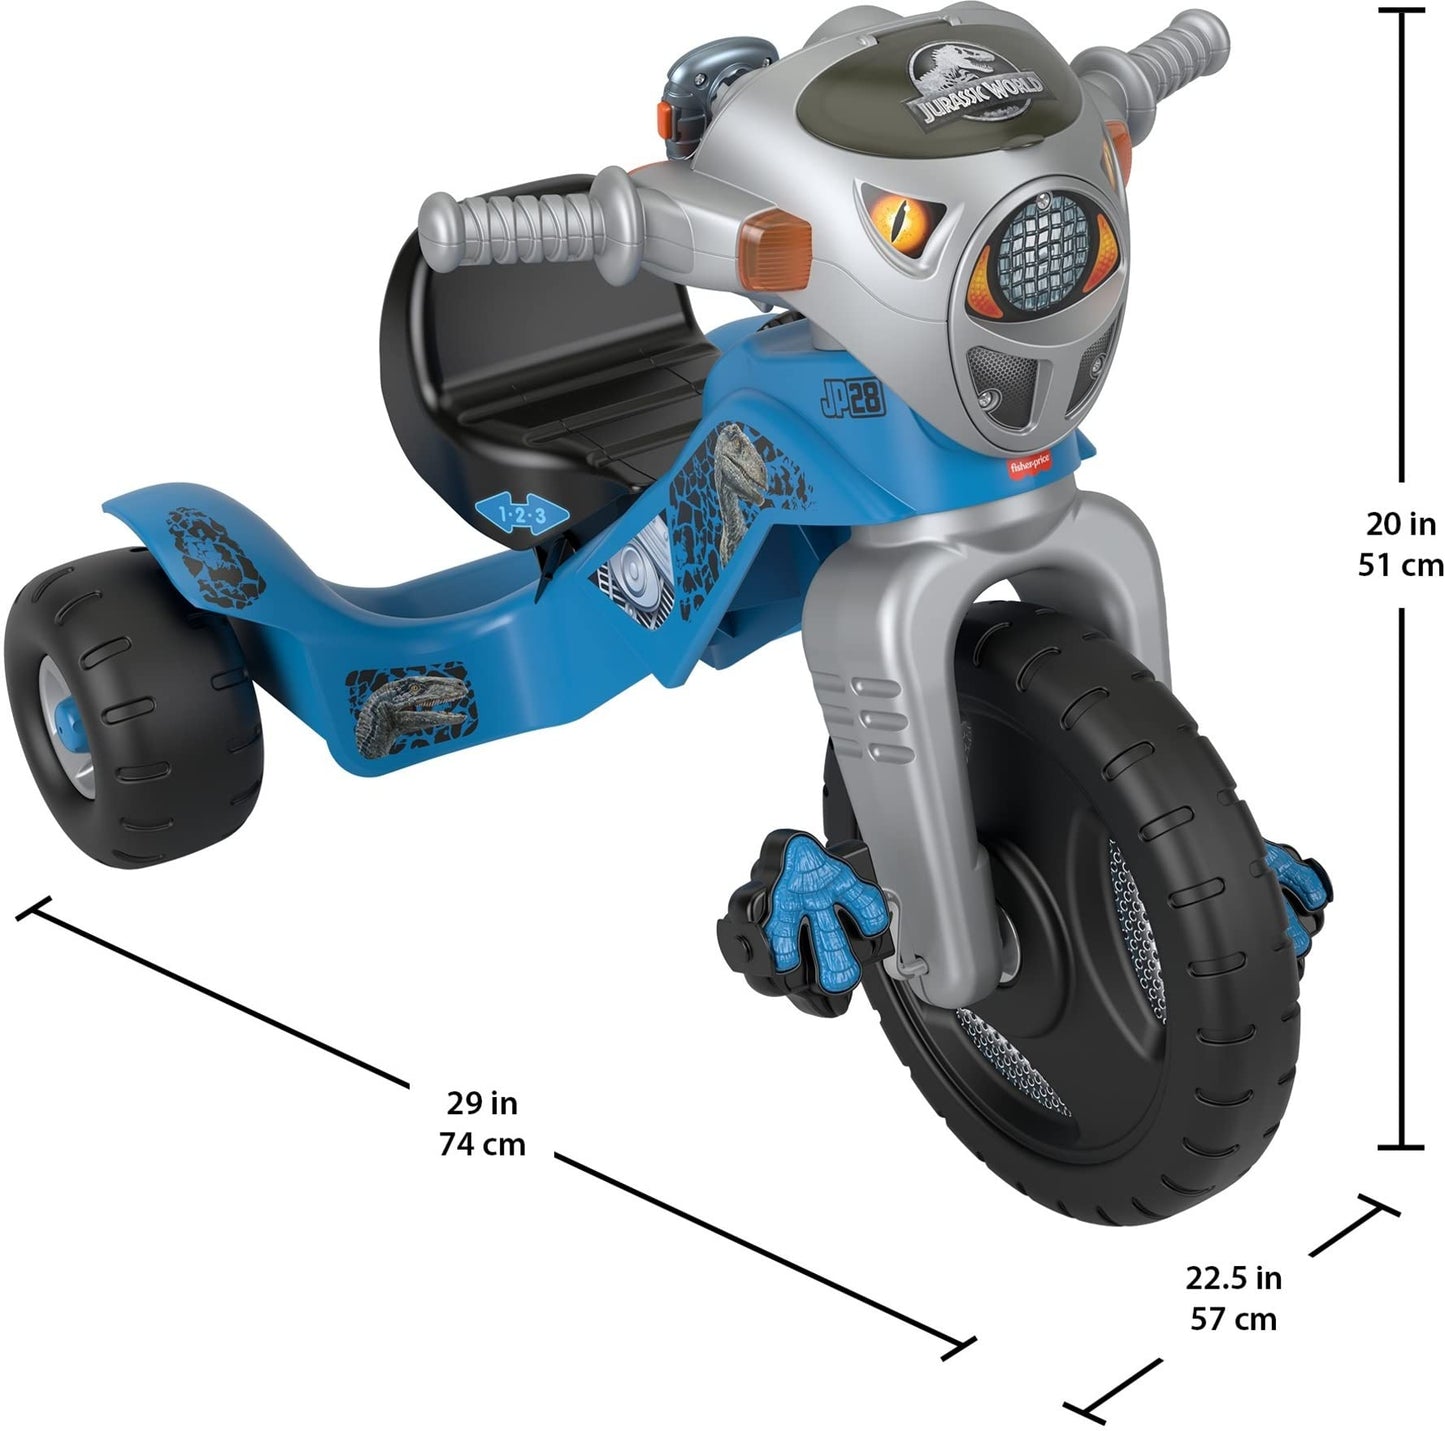 Fisher-Price Jurassic World Toddler Tricycle Lights